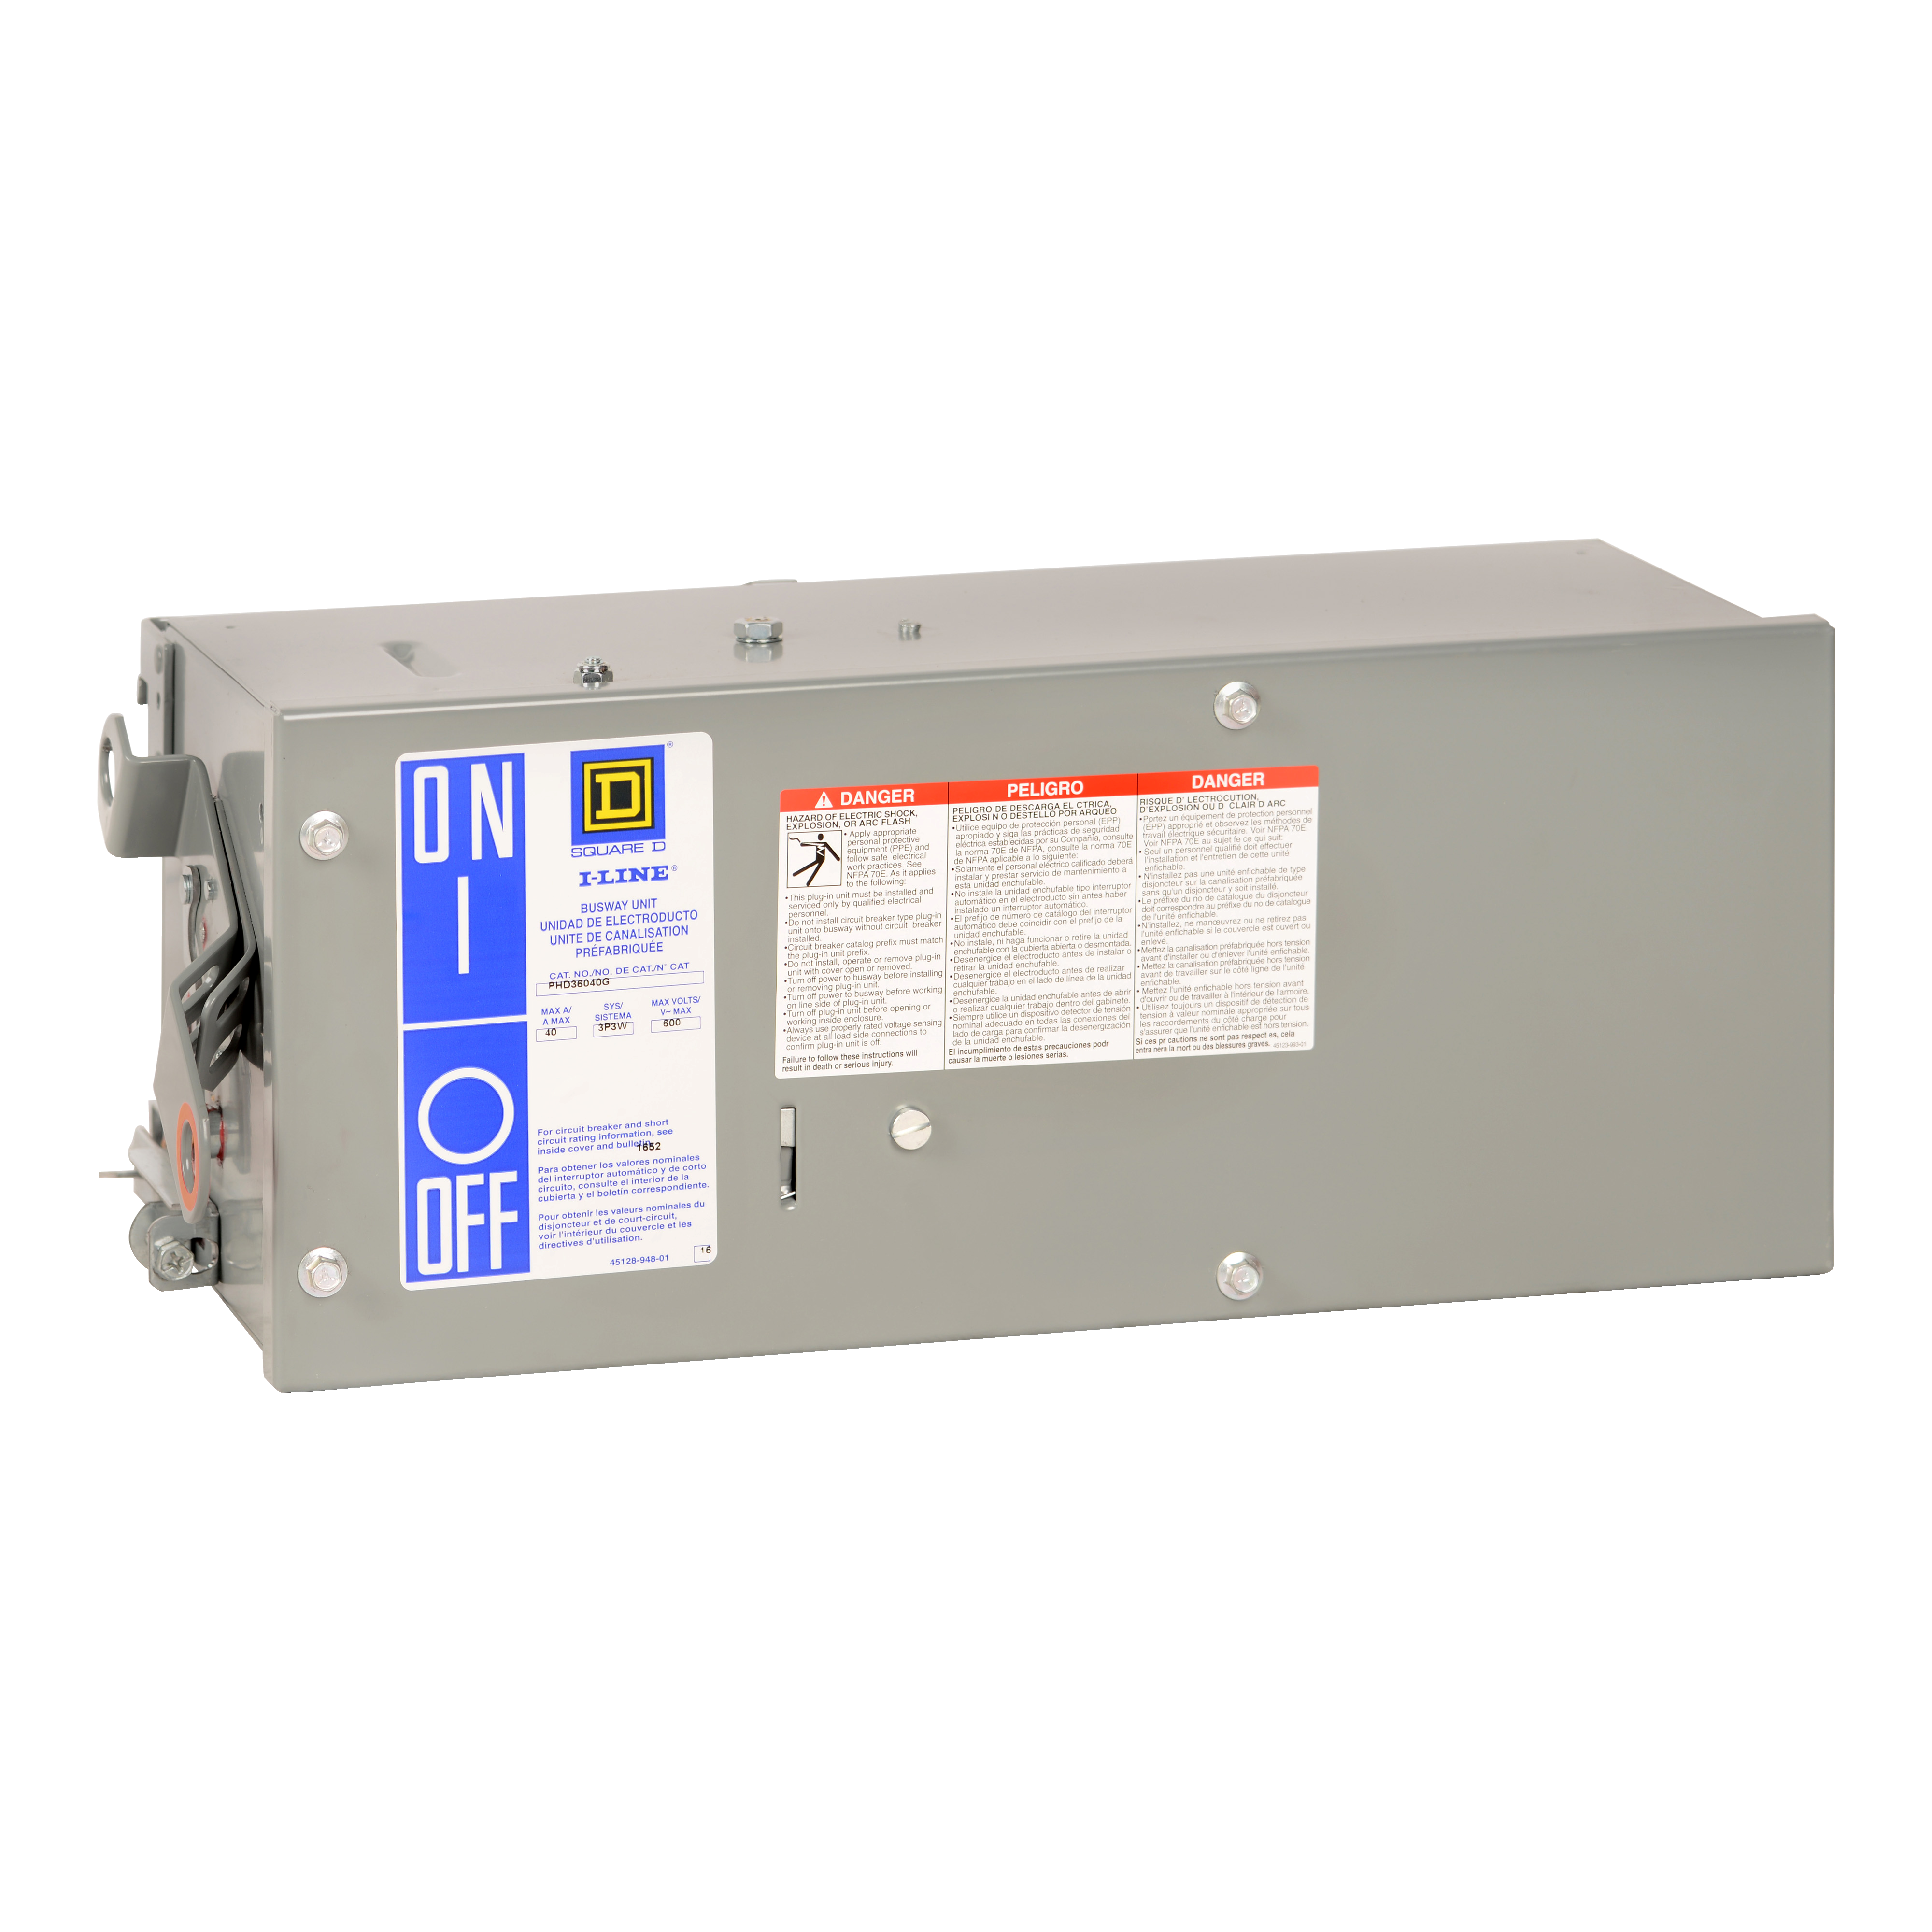 Plug-in unit, I-Line Busway, H-frame, 150A, 3 phase, 3 wire, 600VAC, 18kA, ground